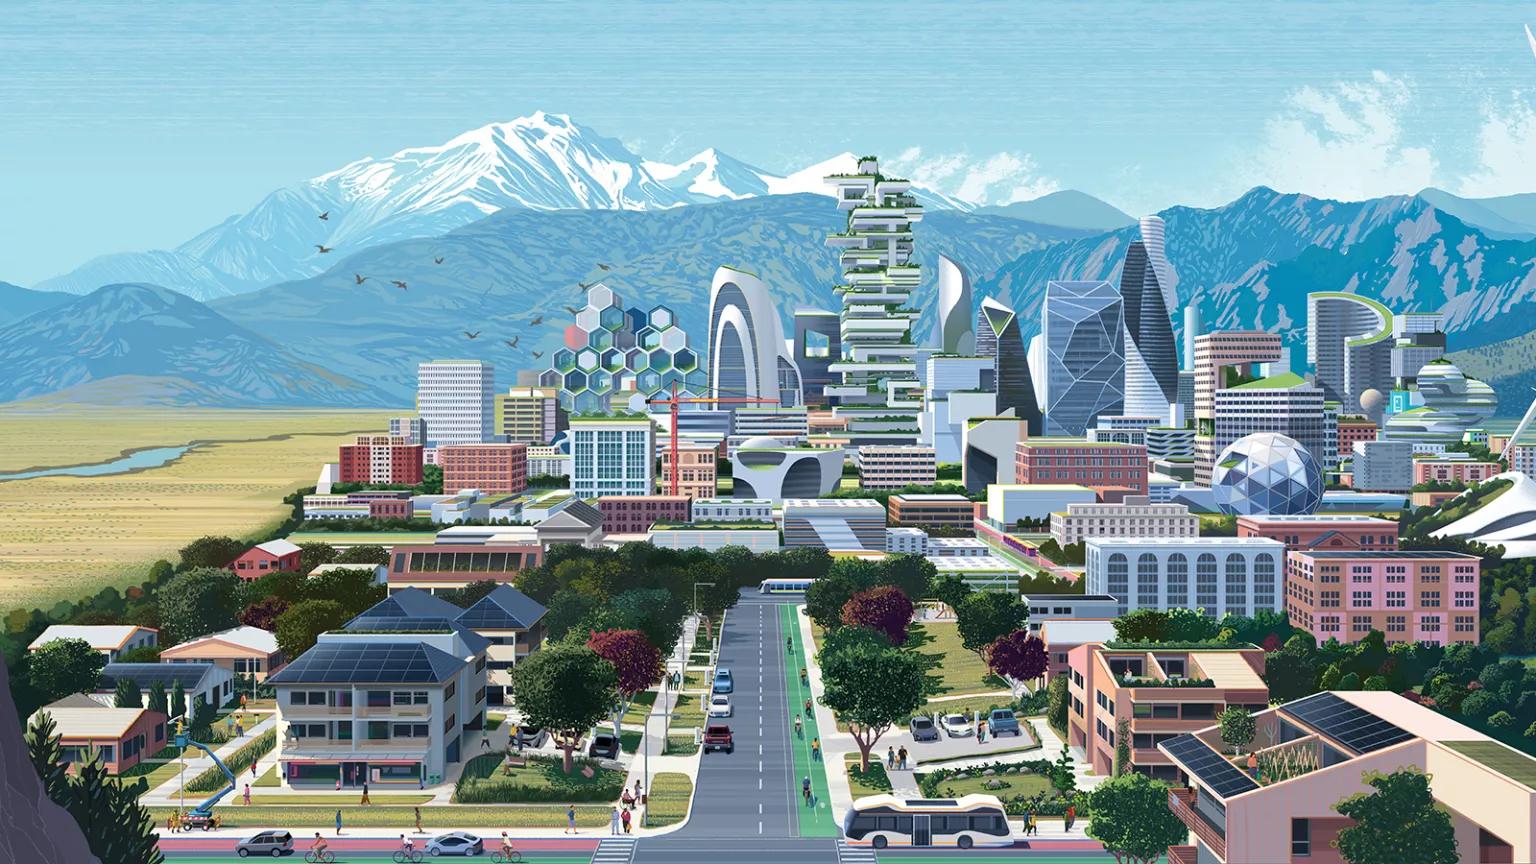 An illustration of a futuristic cityscape with a wind turbine, buildings with rooftop solar panels and gardens, and a river and snowy mountain peaks in the distance